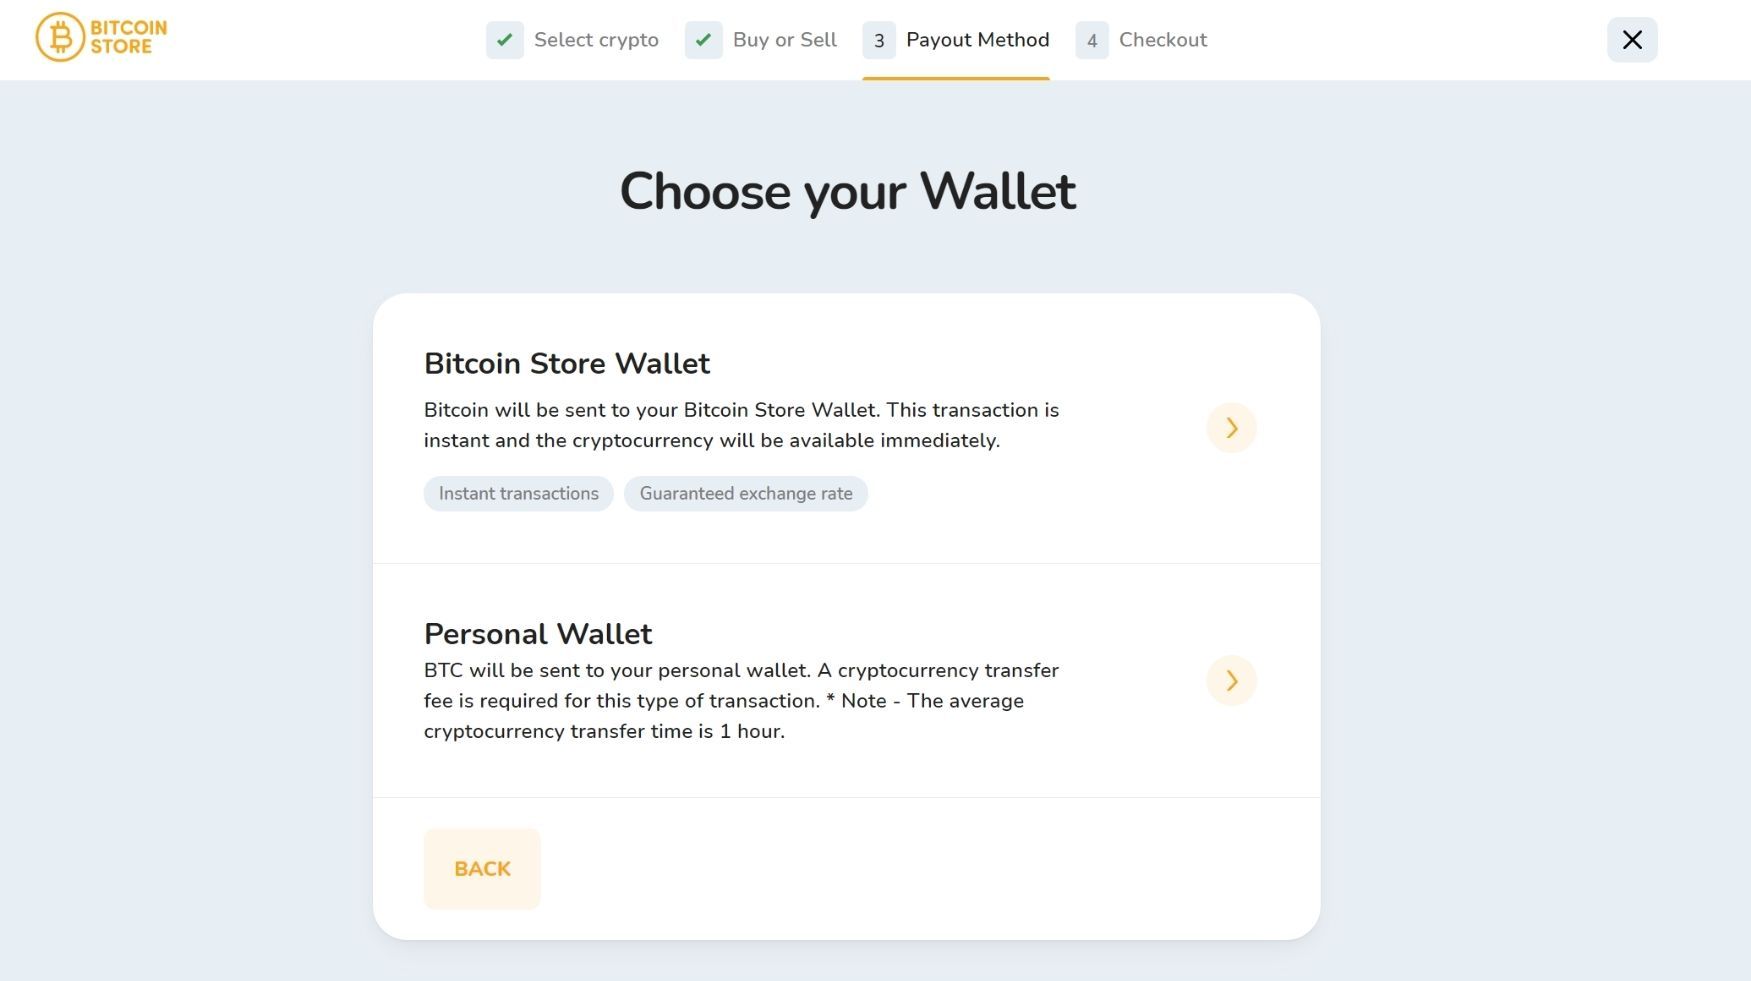 The window for selecting the wallet as a payout method on the Bitcoin Store platform.